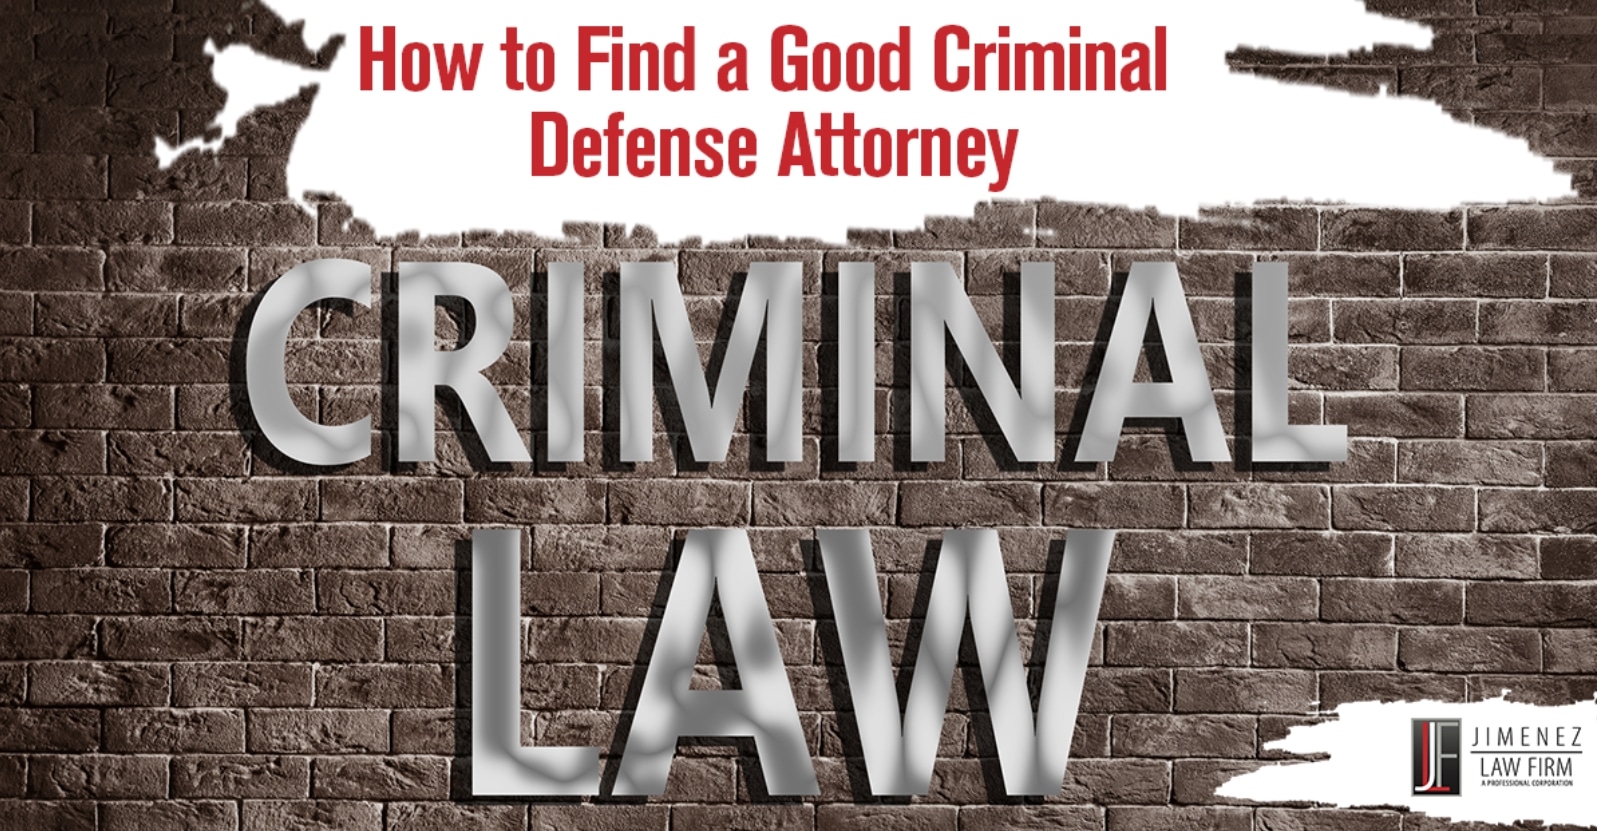 Image of a brick wall in the background with the words Criminal Law attached in a silver metallic color. If you or someone close to you has been accused of a crime, it can be intimidating to figure out how to find the right criminal defense attorney. With so many lawyers offering their services, it's hard to know who is reputable and who will provide the best representation for your case. The consequences of hiring the wrong criminal defense attorney can be devastating — from losing a case in court to serving an excessive sentence, these consequences can haunt someone for years. Turning to The Jimenez Law Firm, P.C. is the solution you need. Their experienced attorneys have years of experience in criminal law and they are skilled at representing a variety of cases. From providing personalized representation tailored to each individual client’s needs to developing effective strategies based on up-to-date knowledge of criminal law.